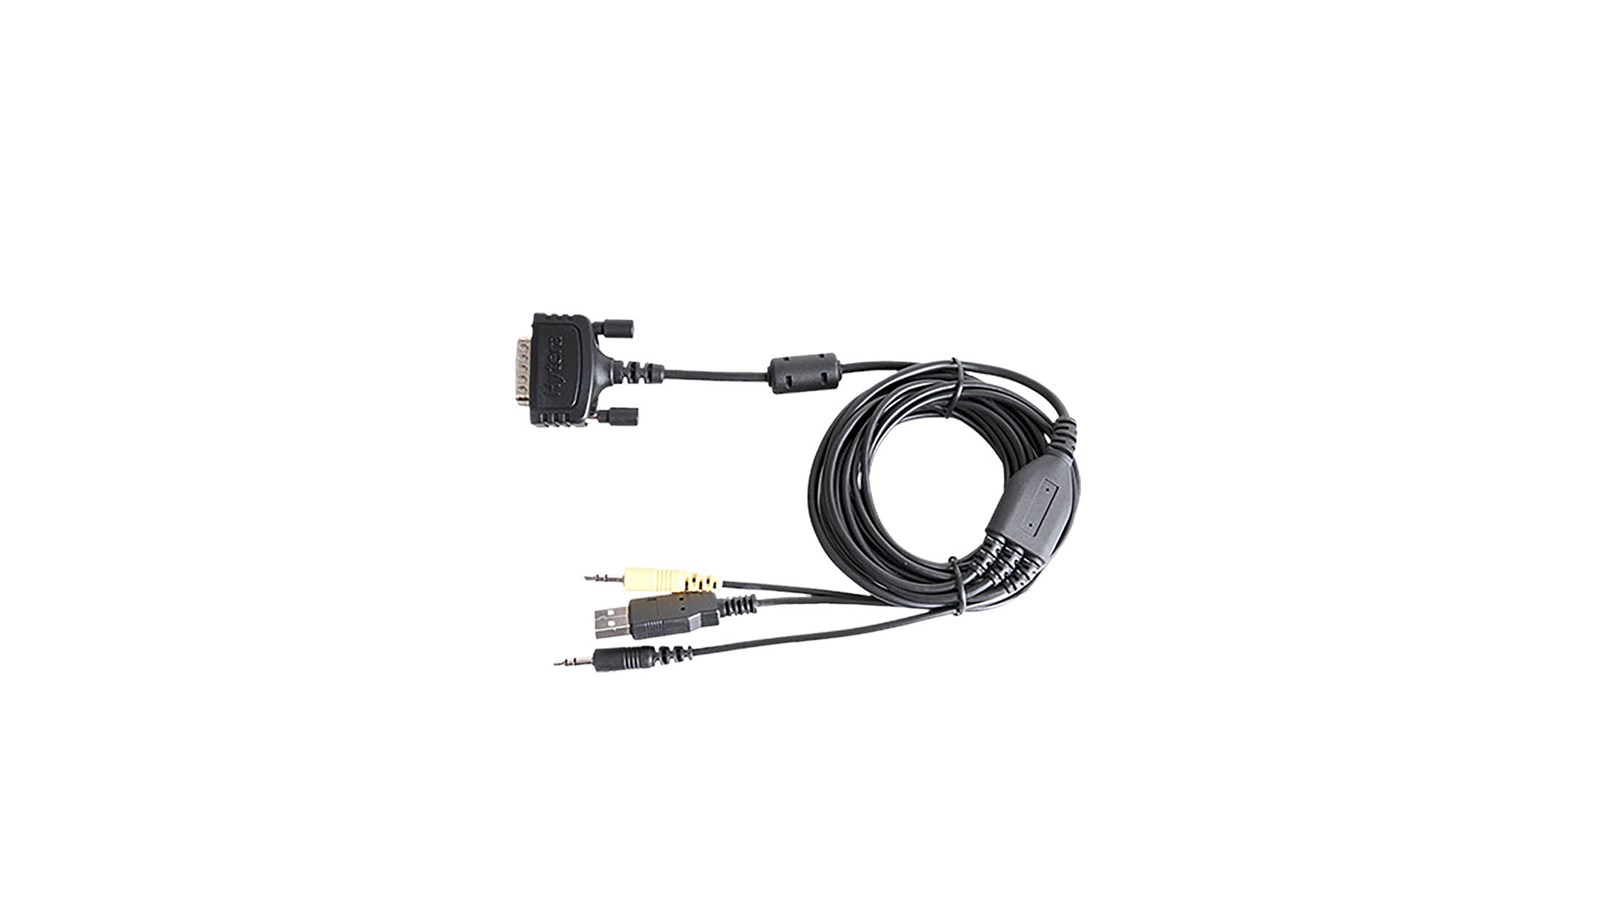 PC43 Dispatching Cable with USB PortDual Audio Jack